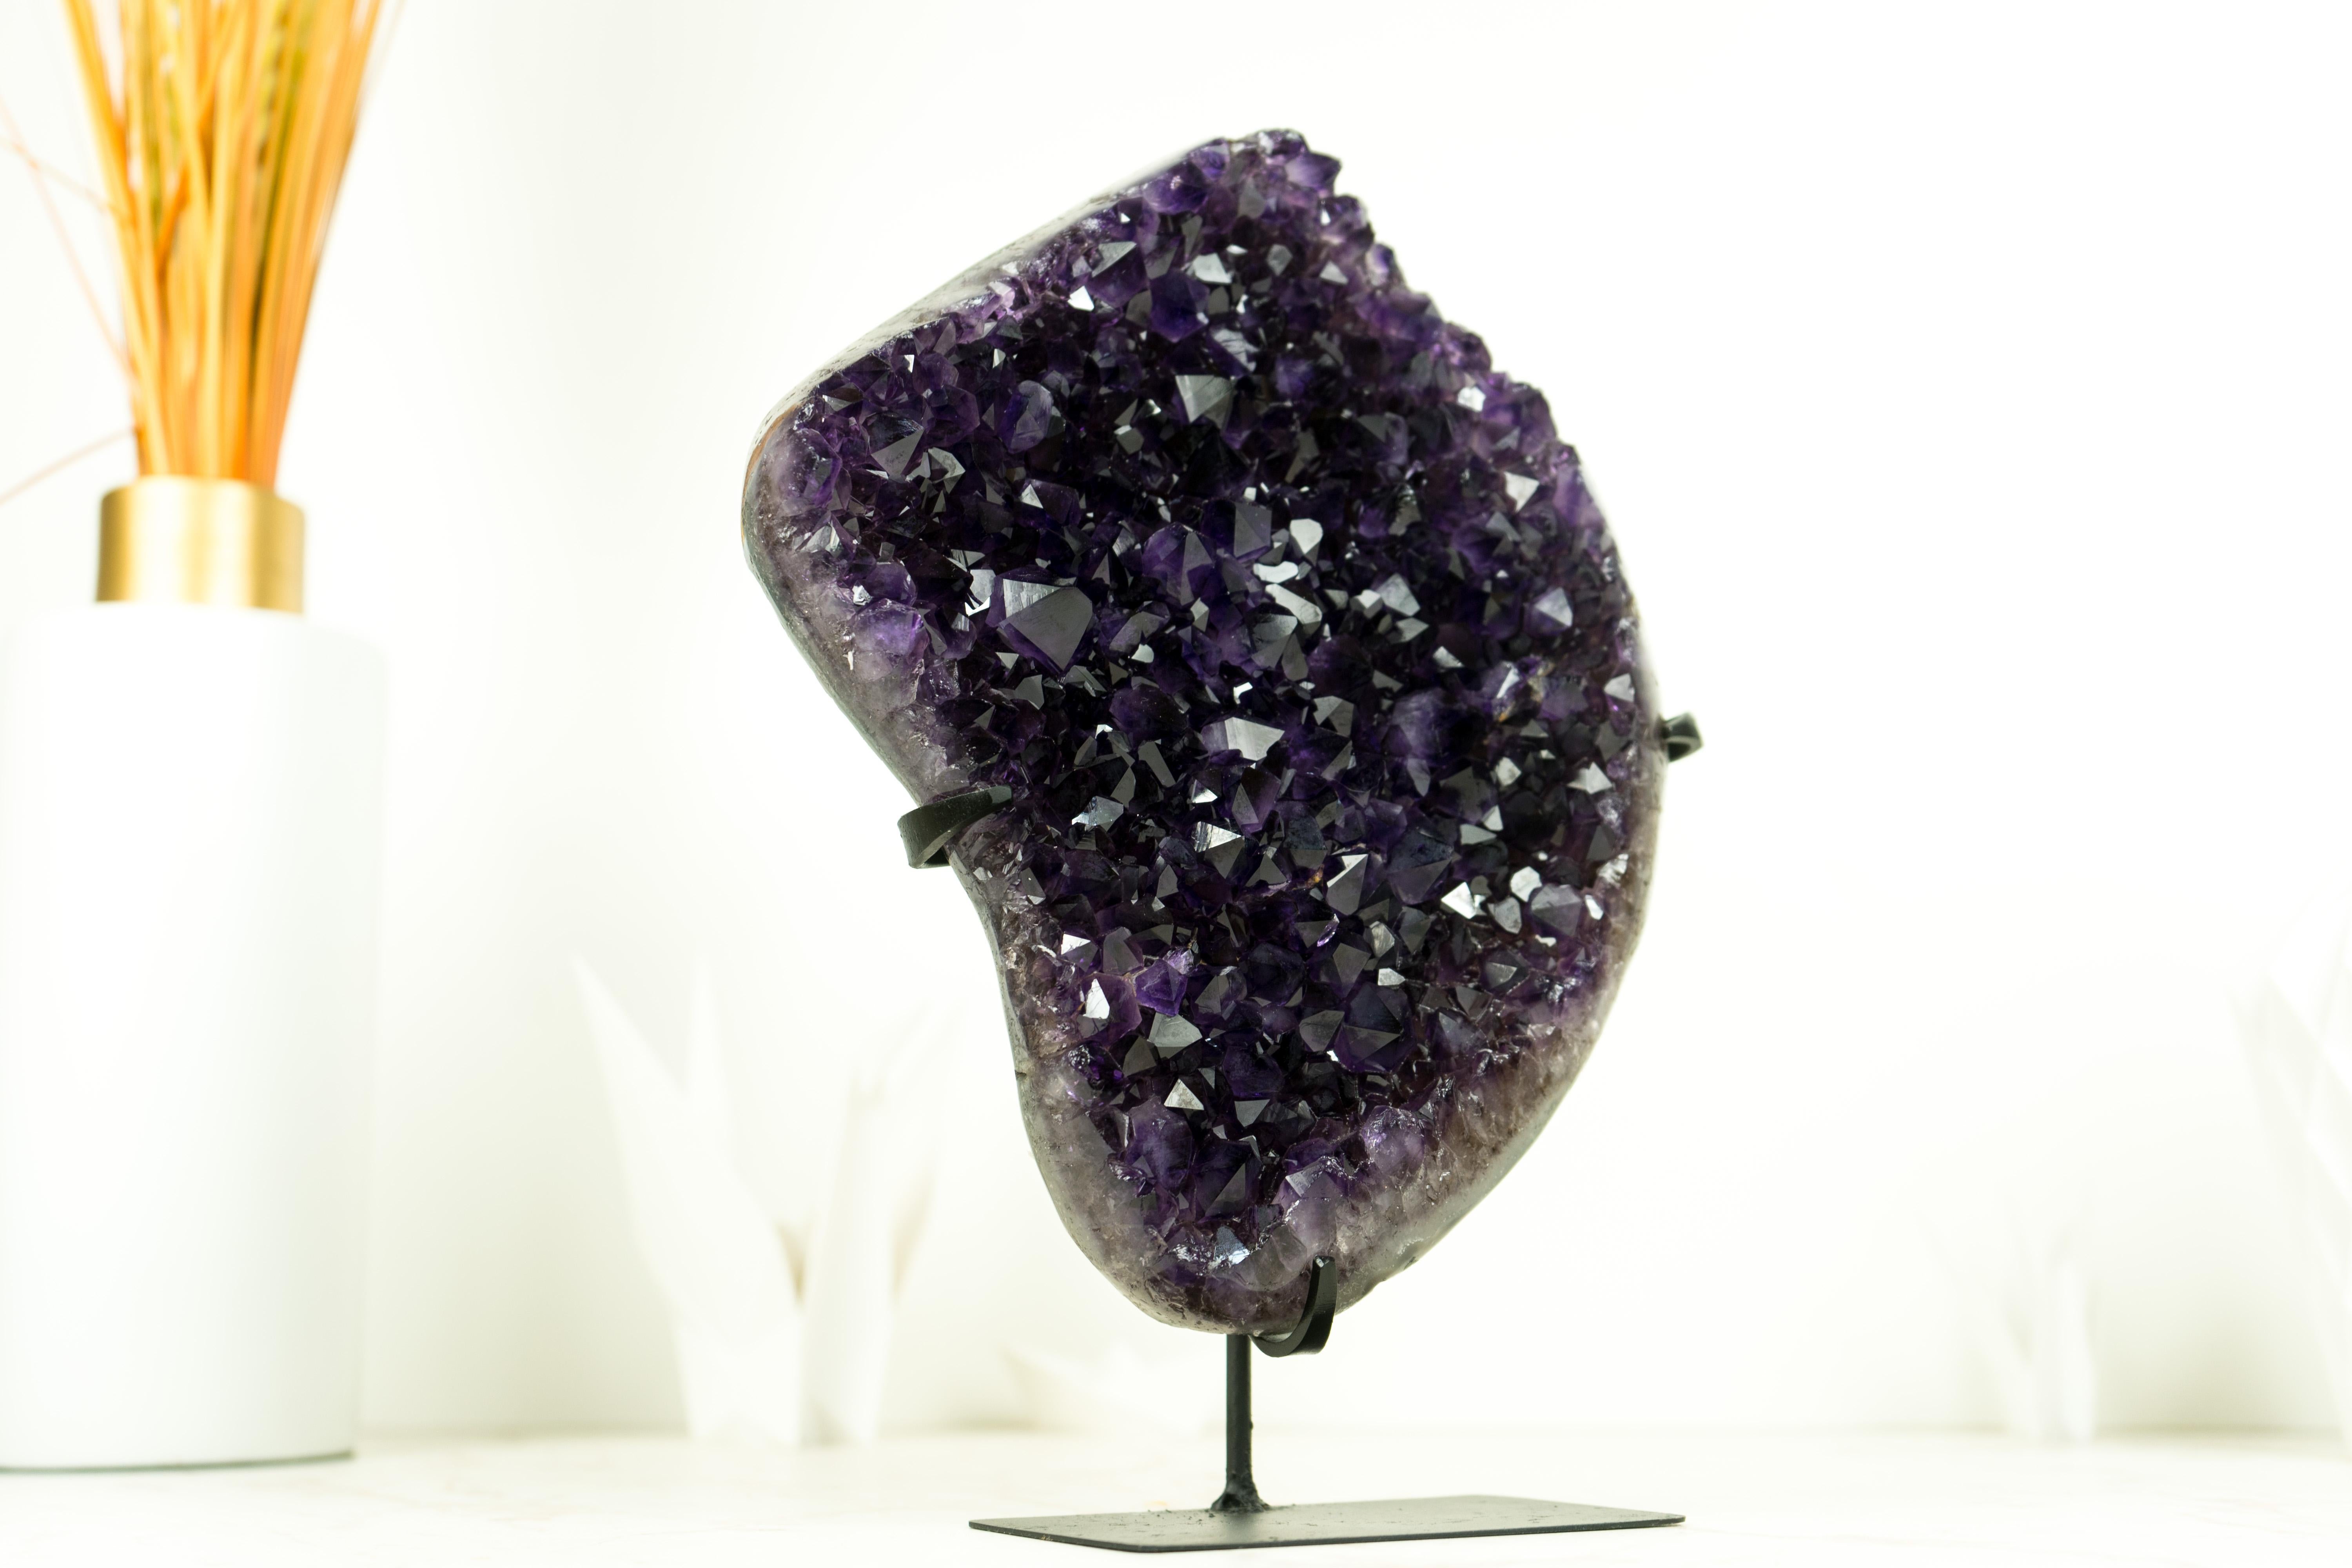 An Amethyst Cluster of exceptional beauty, this piece showcases the deepest shade of purple, AKA Grape Jelly Amethyst, on a beautifully formed Amethyst Cluster It's a truly spectacular specimen that will elevate the space of your home, office, or